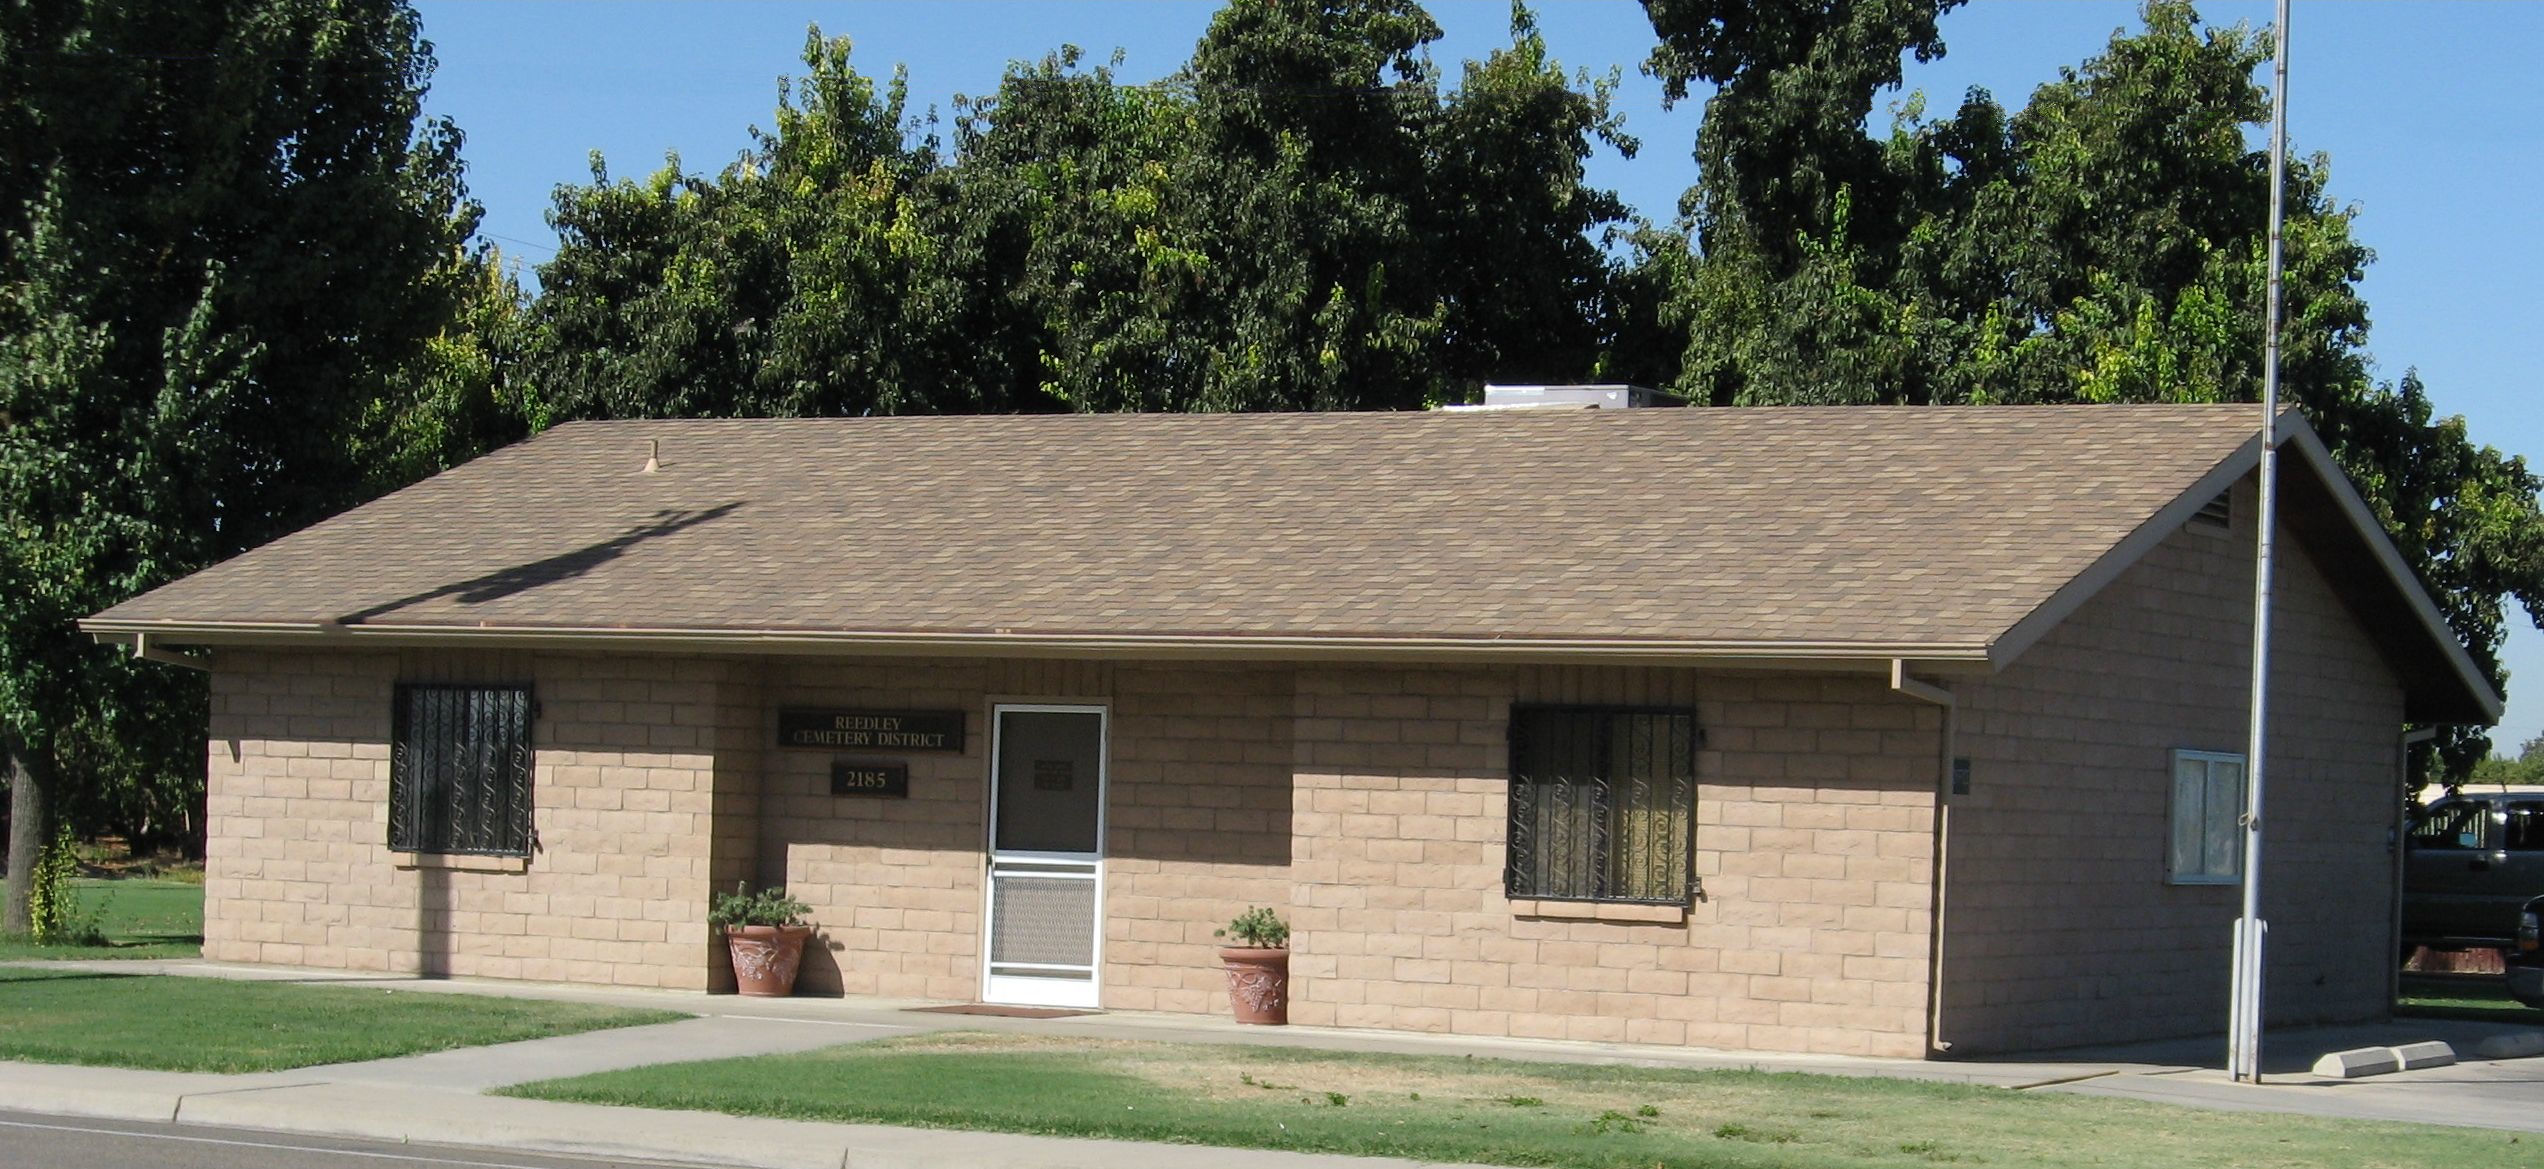 Reedley Cemetery District Office Building